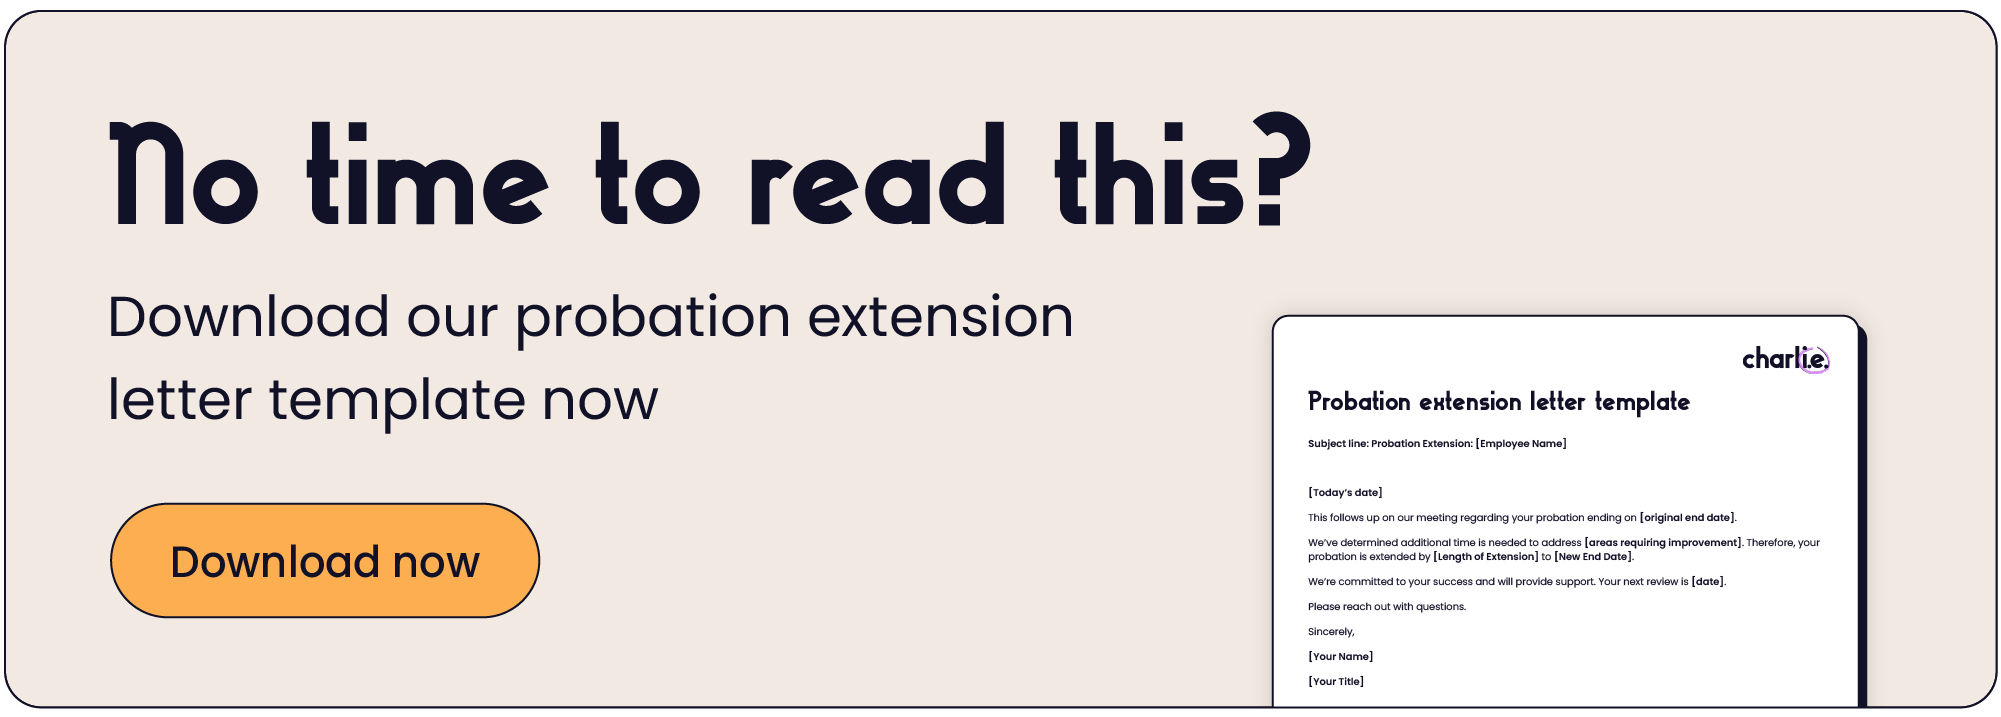 Download our probation extension template